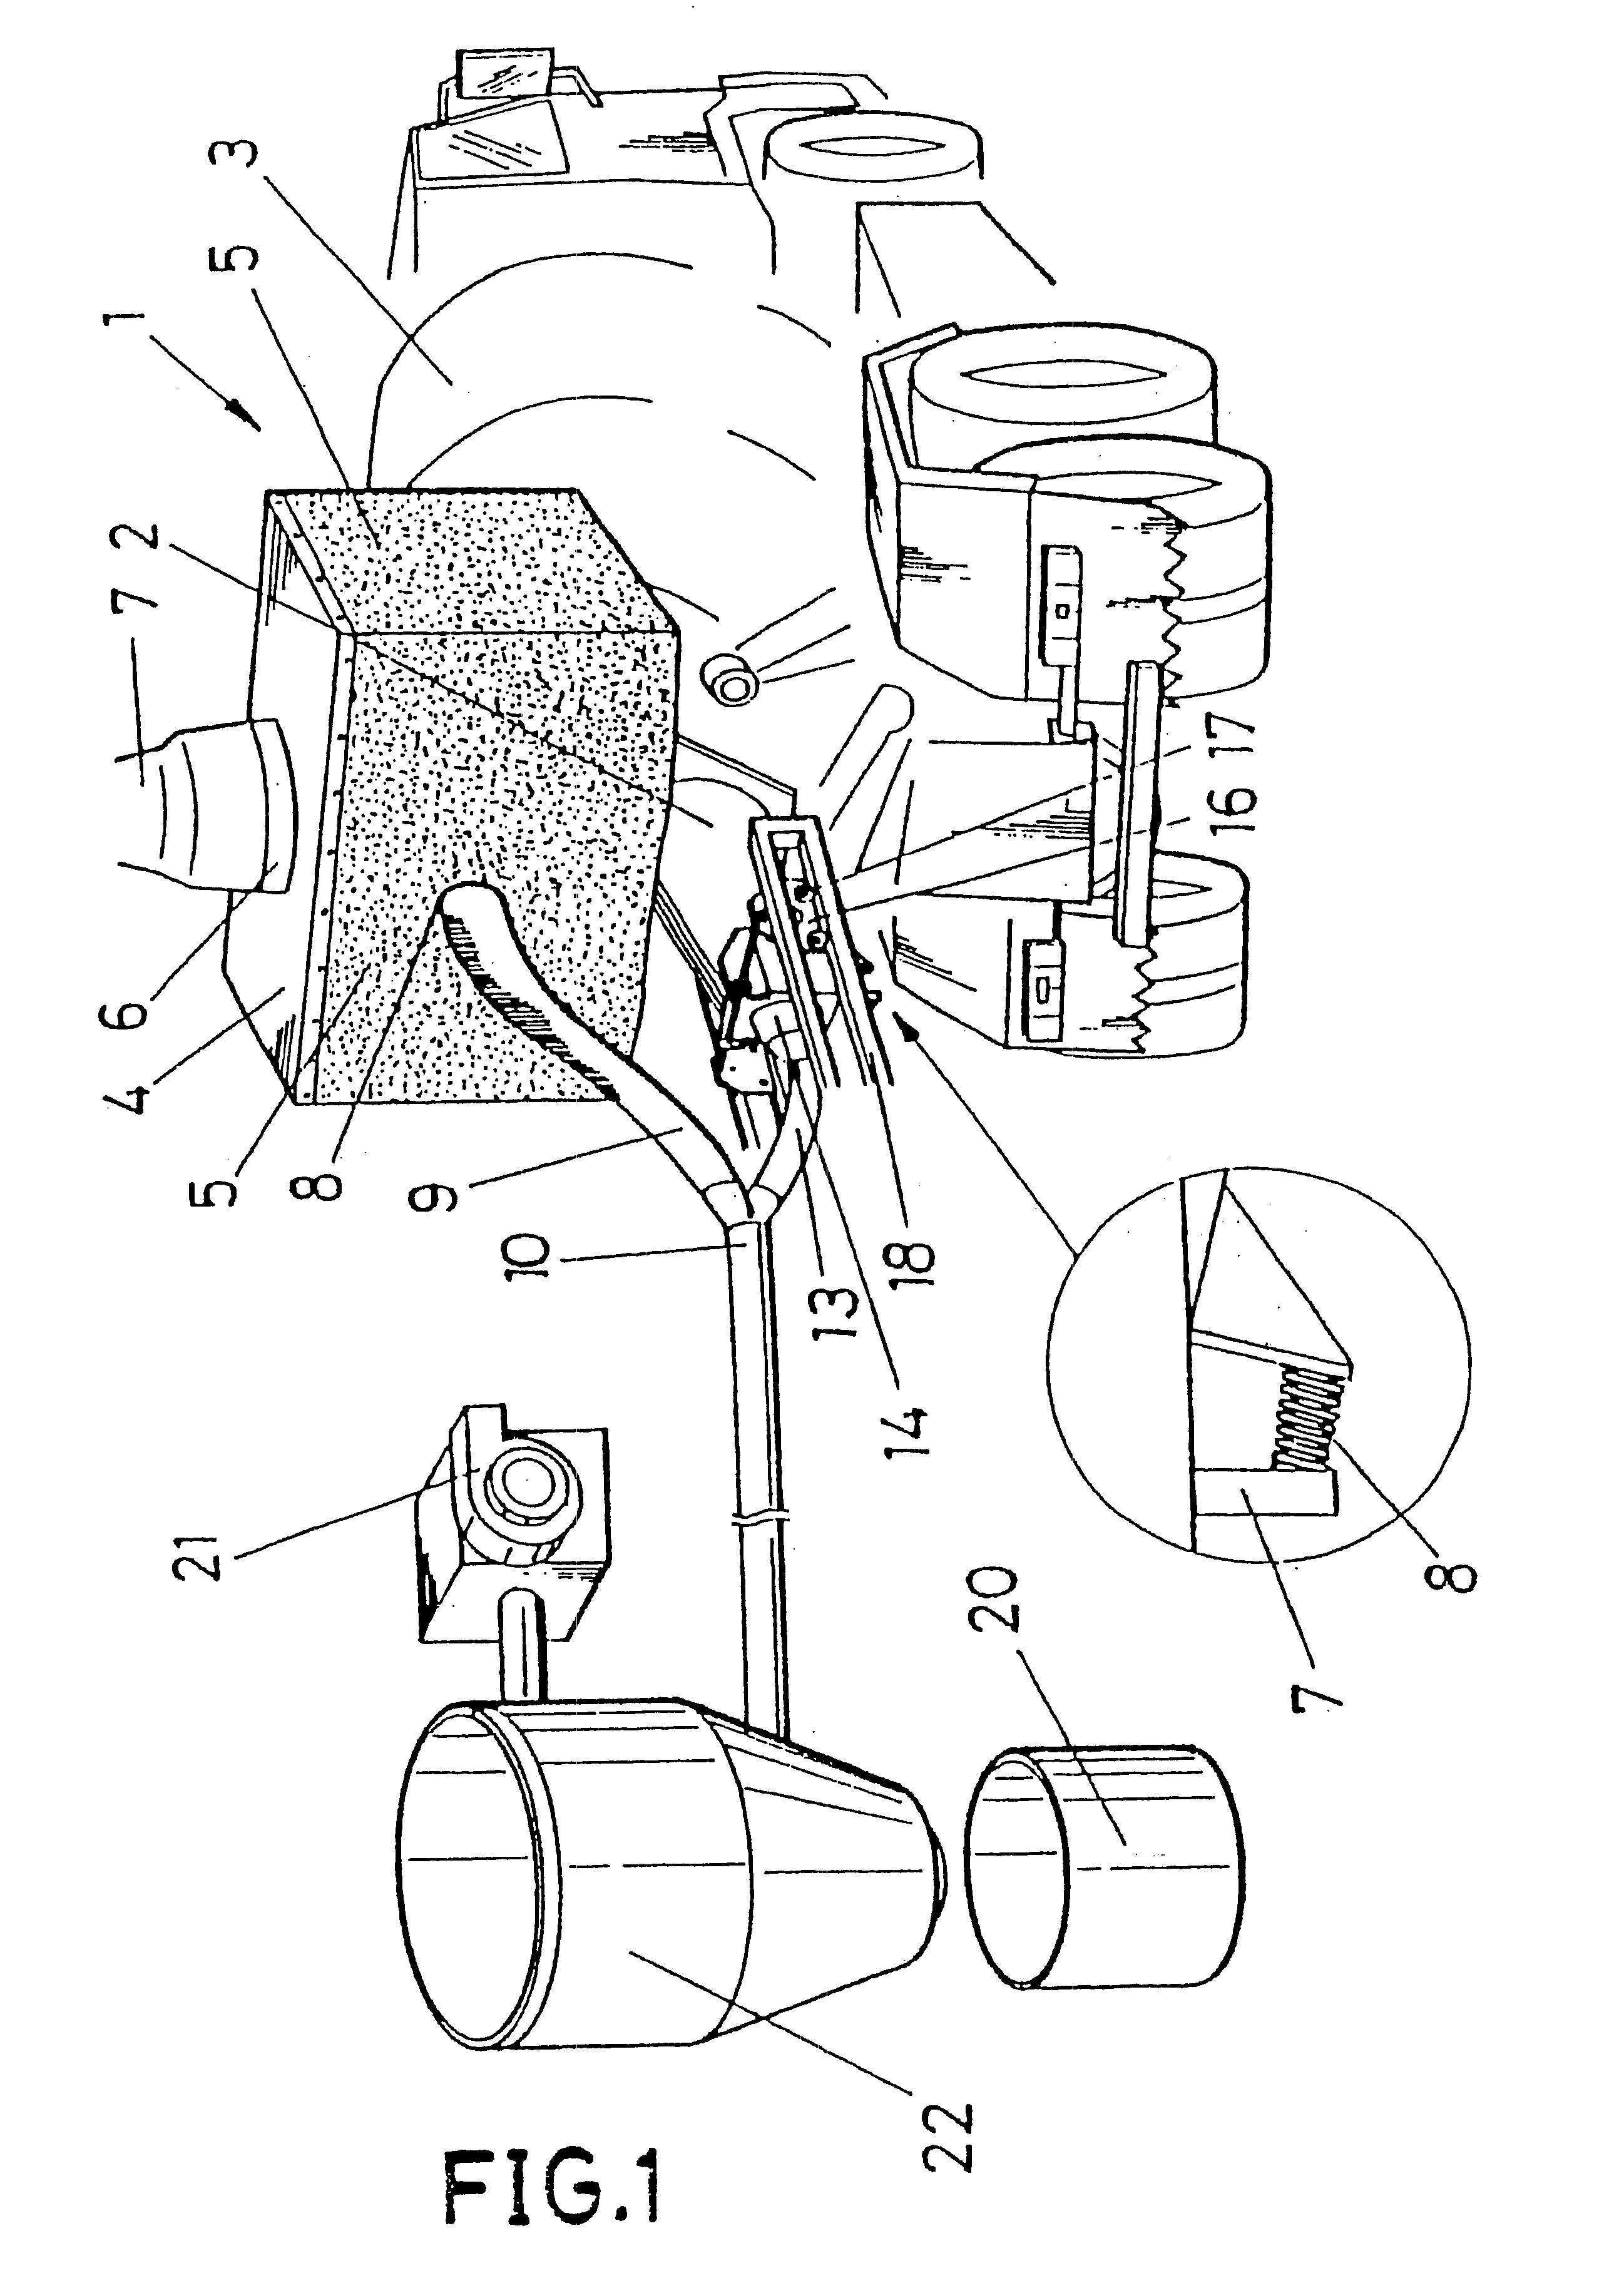 Device for capturing dust in the loading of concrete mixer trucks